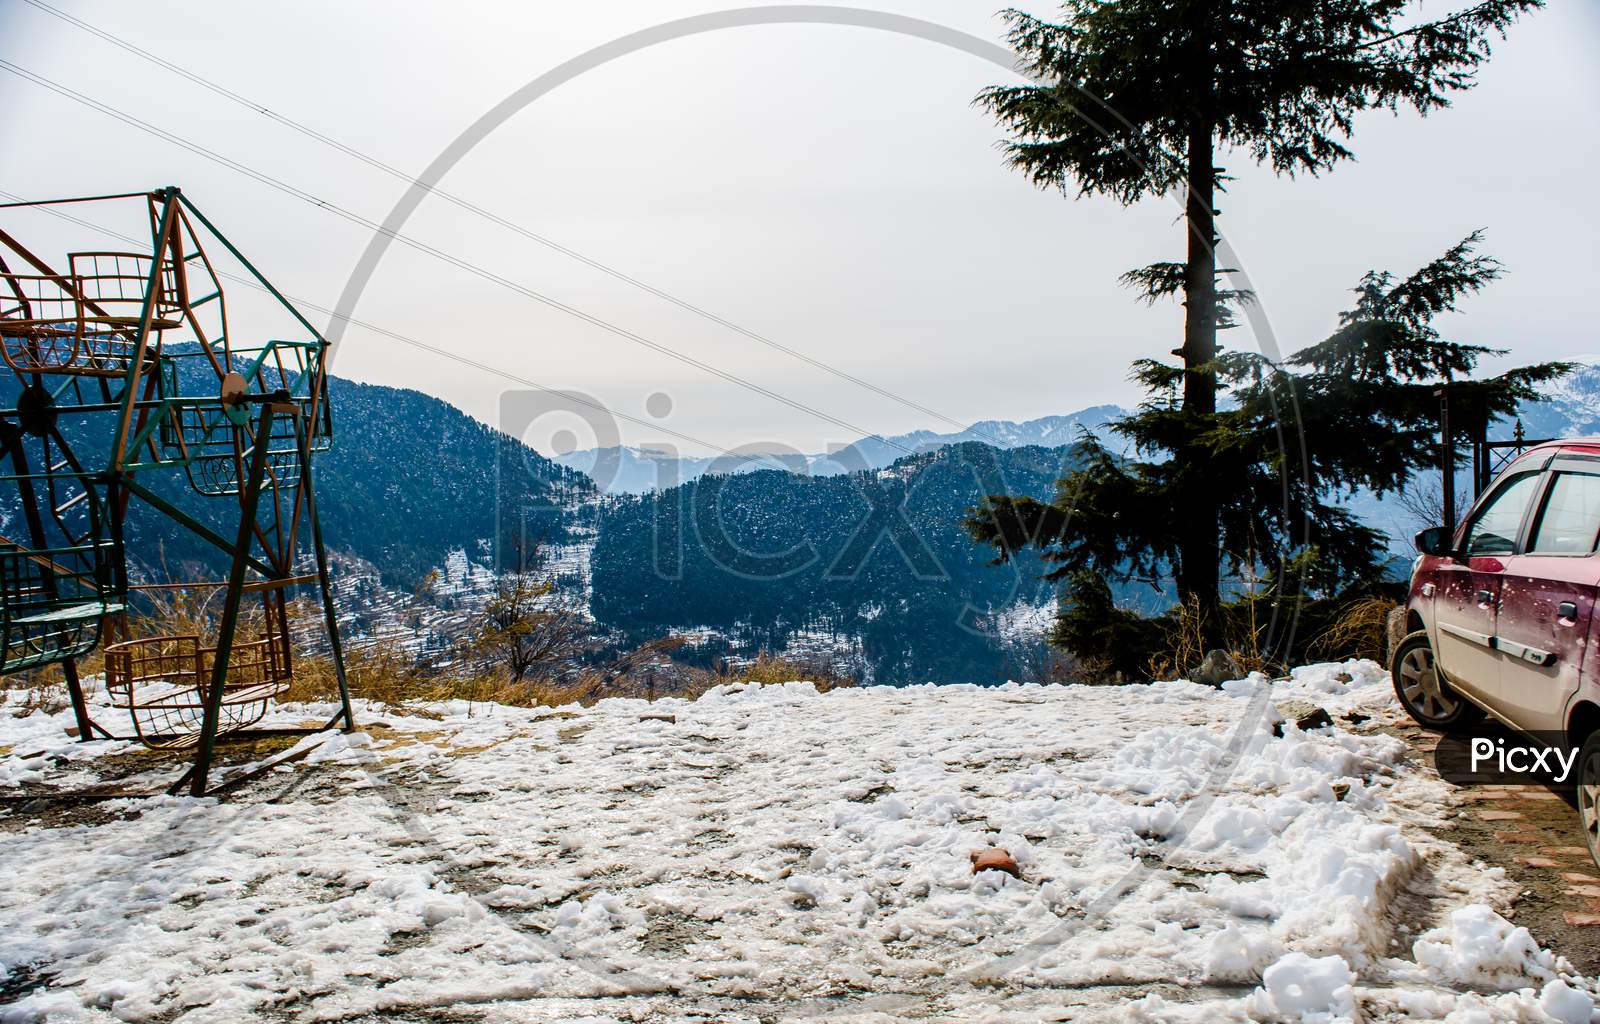 Patnitop a city of Jammu and its park covered with white snow, Winter landscape